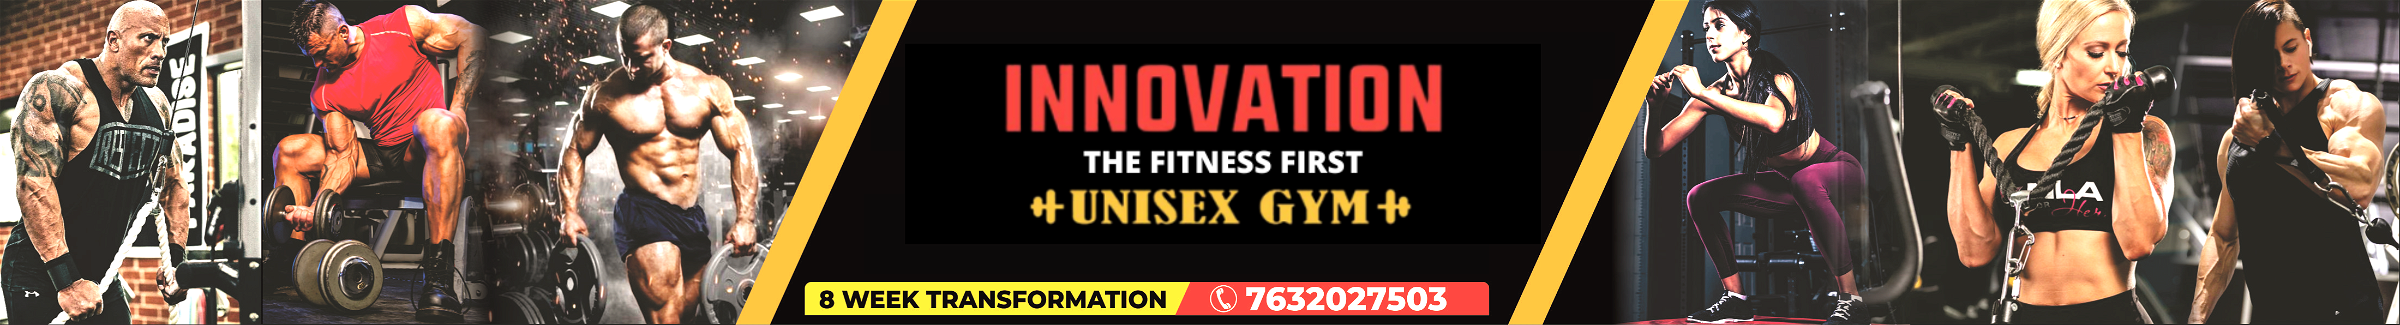 innovation the fitness first gym